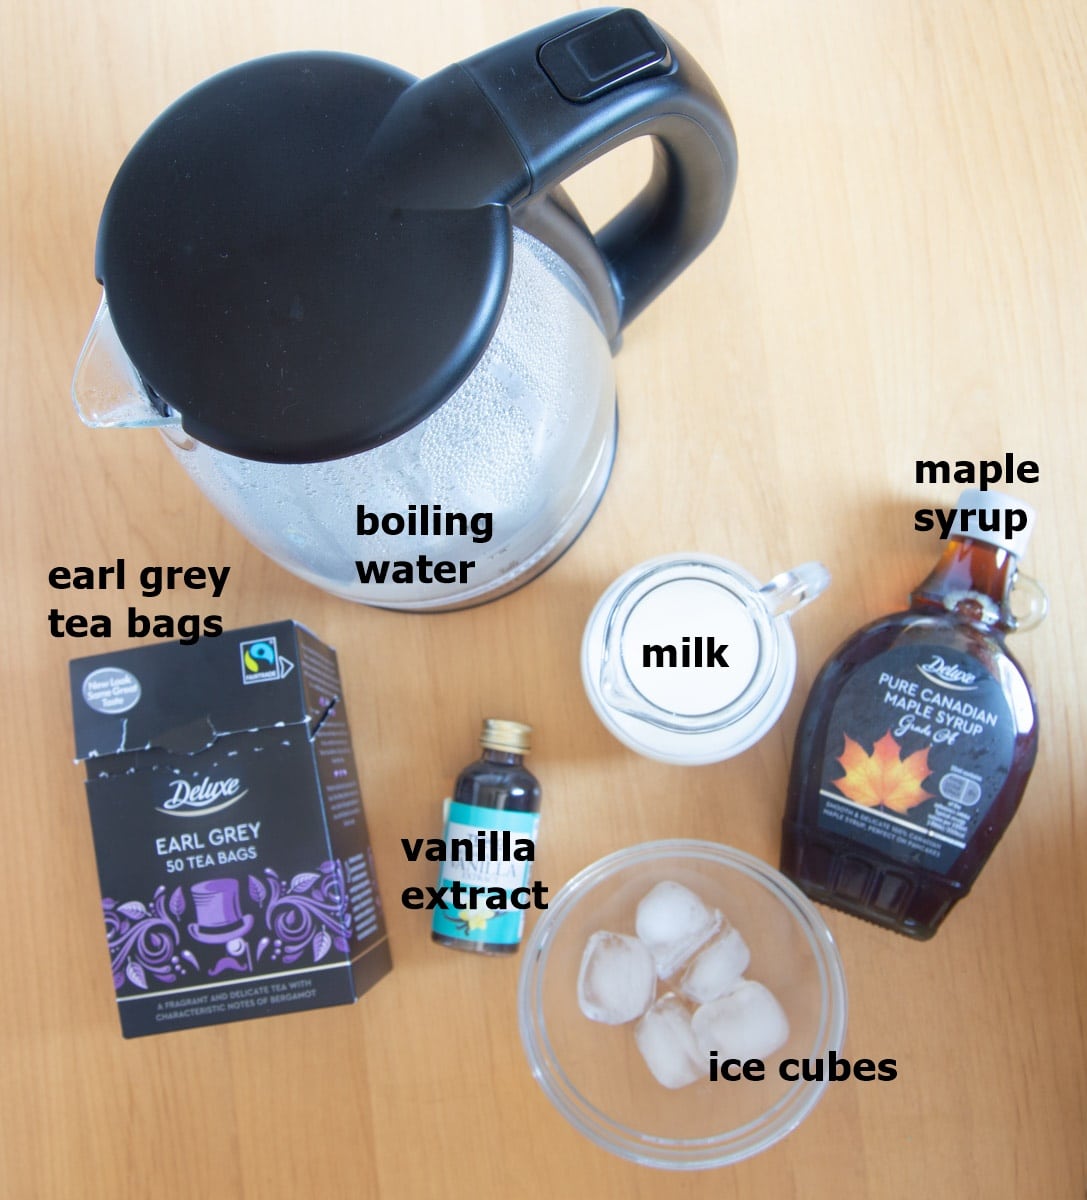 boiling water, earl grey teabags, ice cubes, milk, vanilla extract and maple syrup on wooden table.